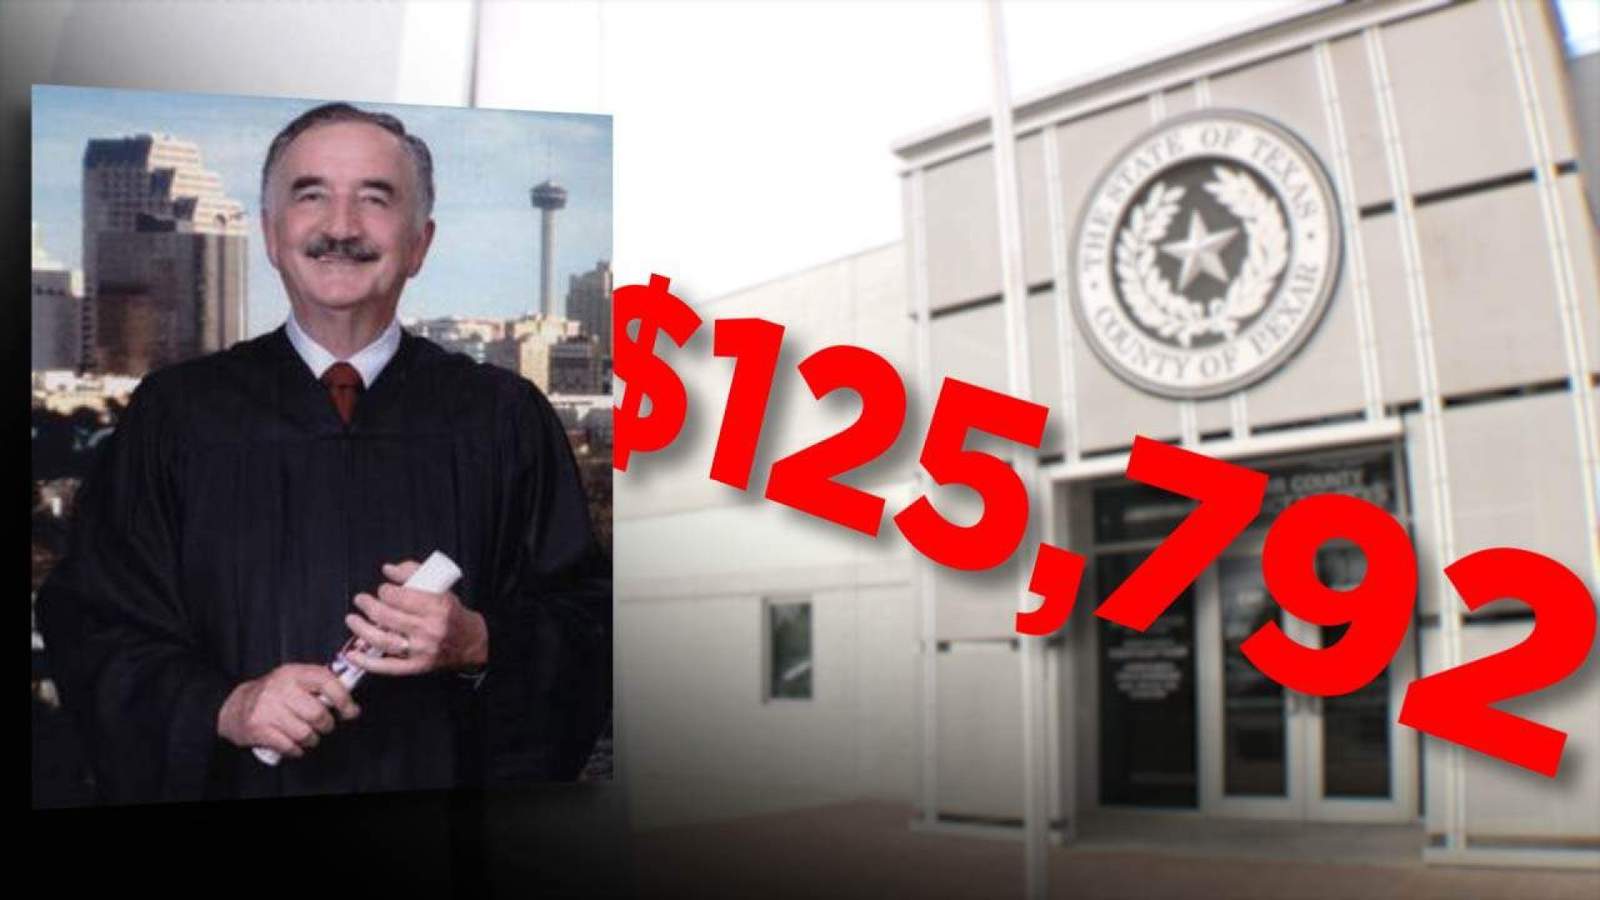 Part-time Bexar County judge handles less than 23% of court’s cases, takes home full-time pay of over $125K a year